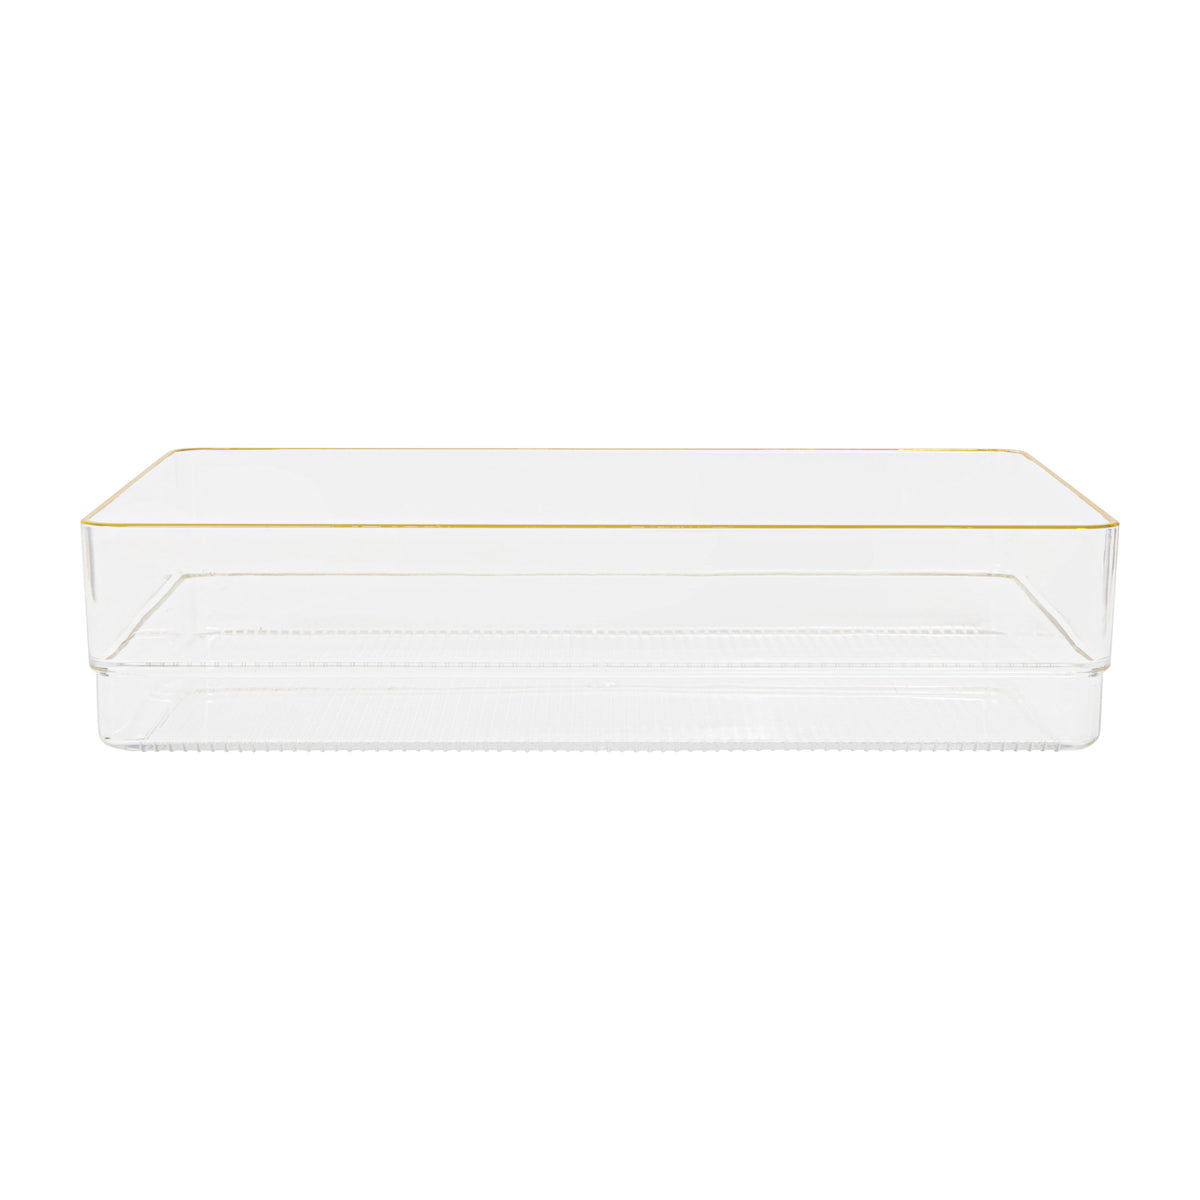 Set of 3 Plastic Stacking Desk Drawer Organizers with Gold Trim - 9 x 6